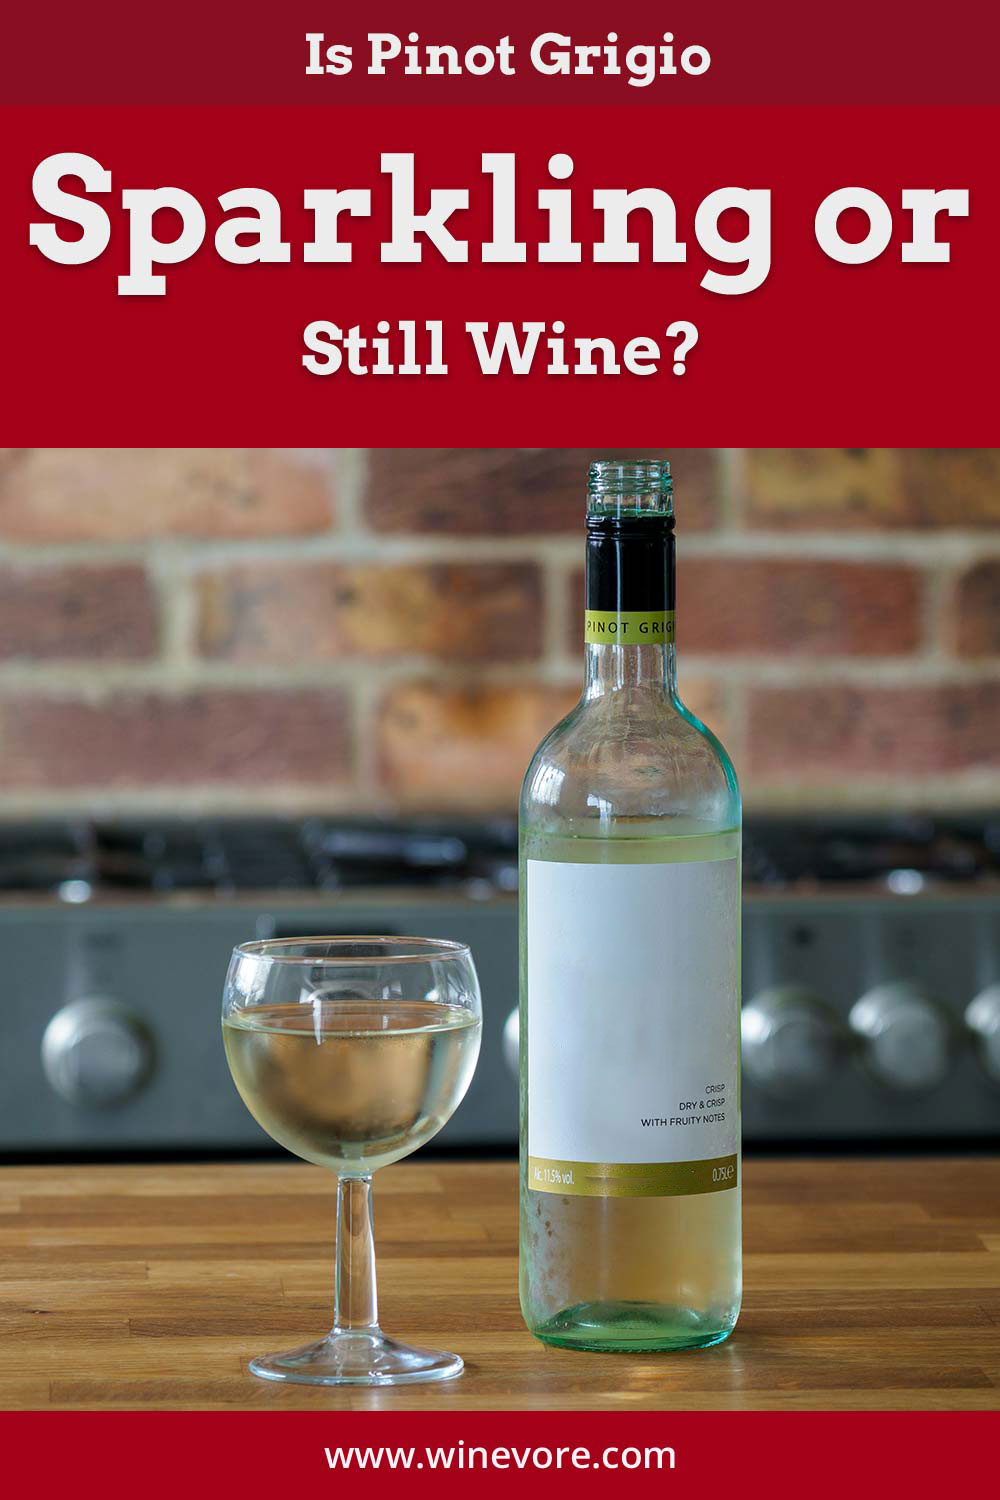 A wine bottle and a glass in front of a stove - Is Pinot Grigio Sparkling or Still Wine?